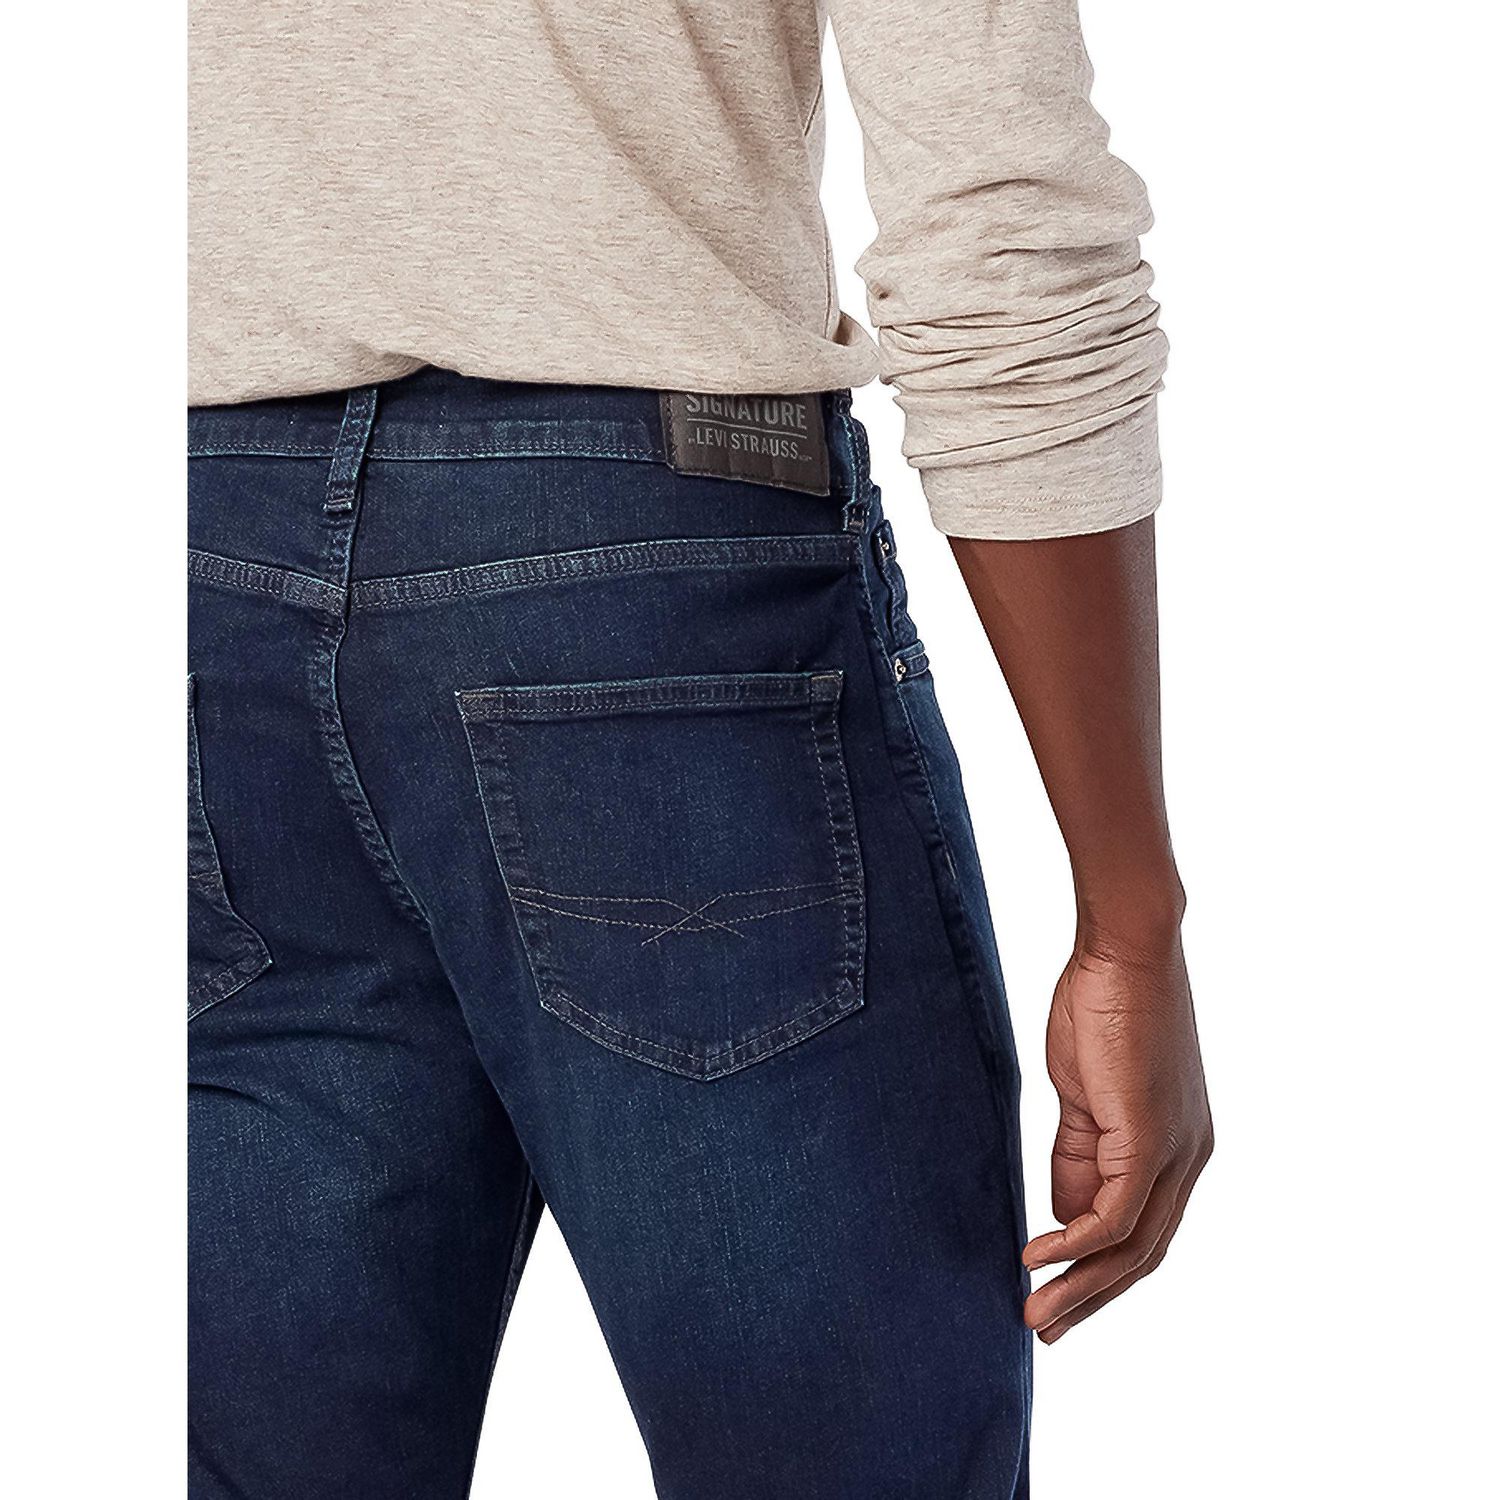 Signature by Levi Strauss & Co.® Men's Regular Fit Taper Jeans